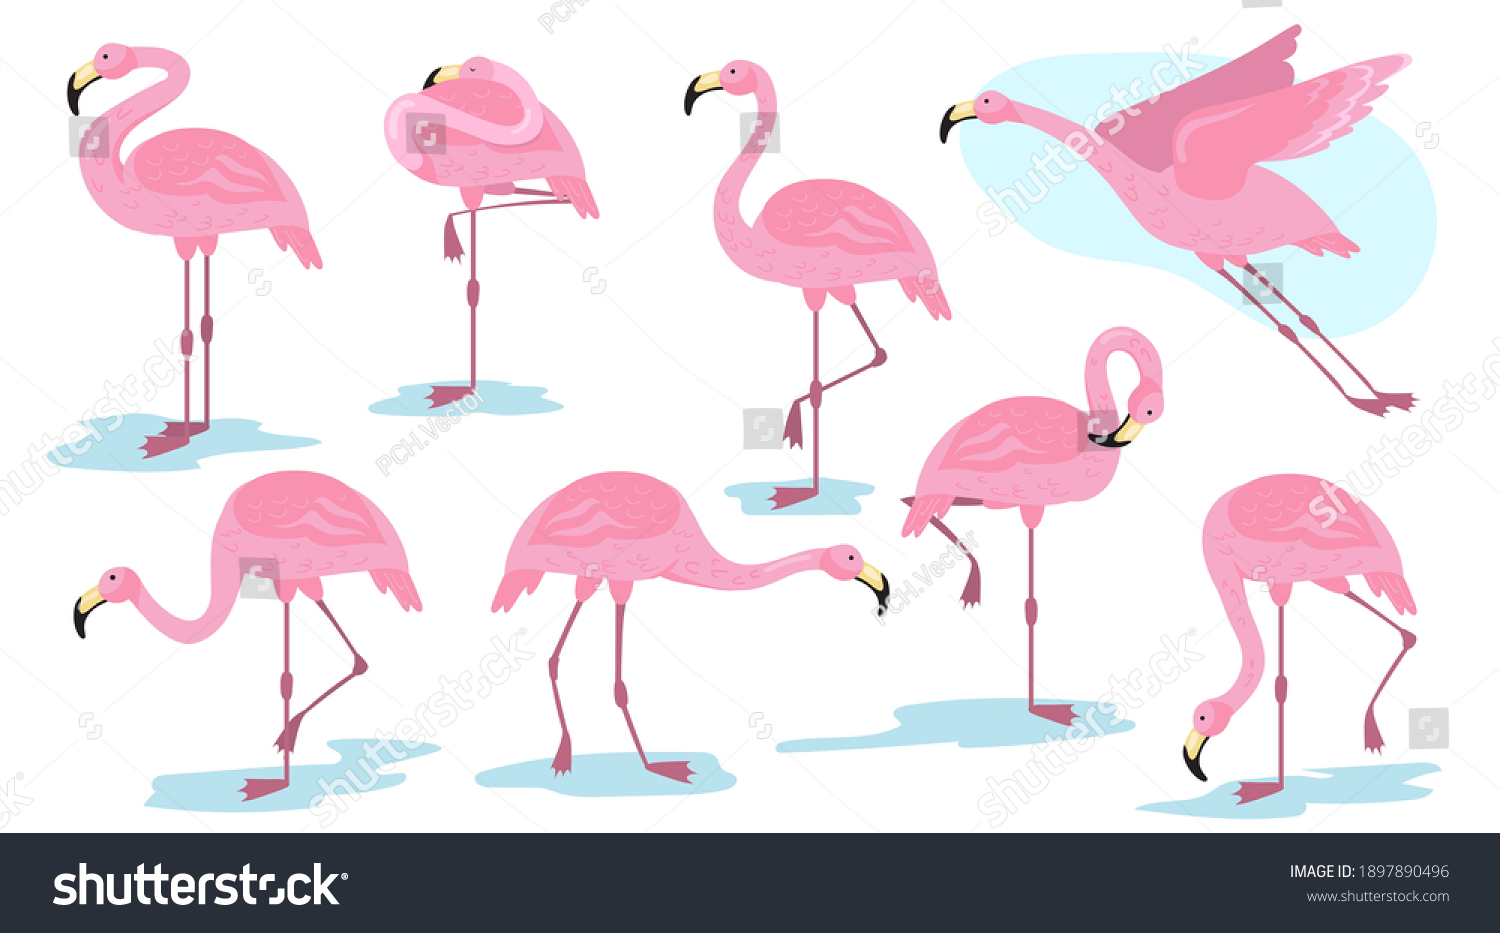 Pink Flamingo Bird Different Poses Flat Stock Vector (Royalty Free ...